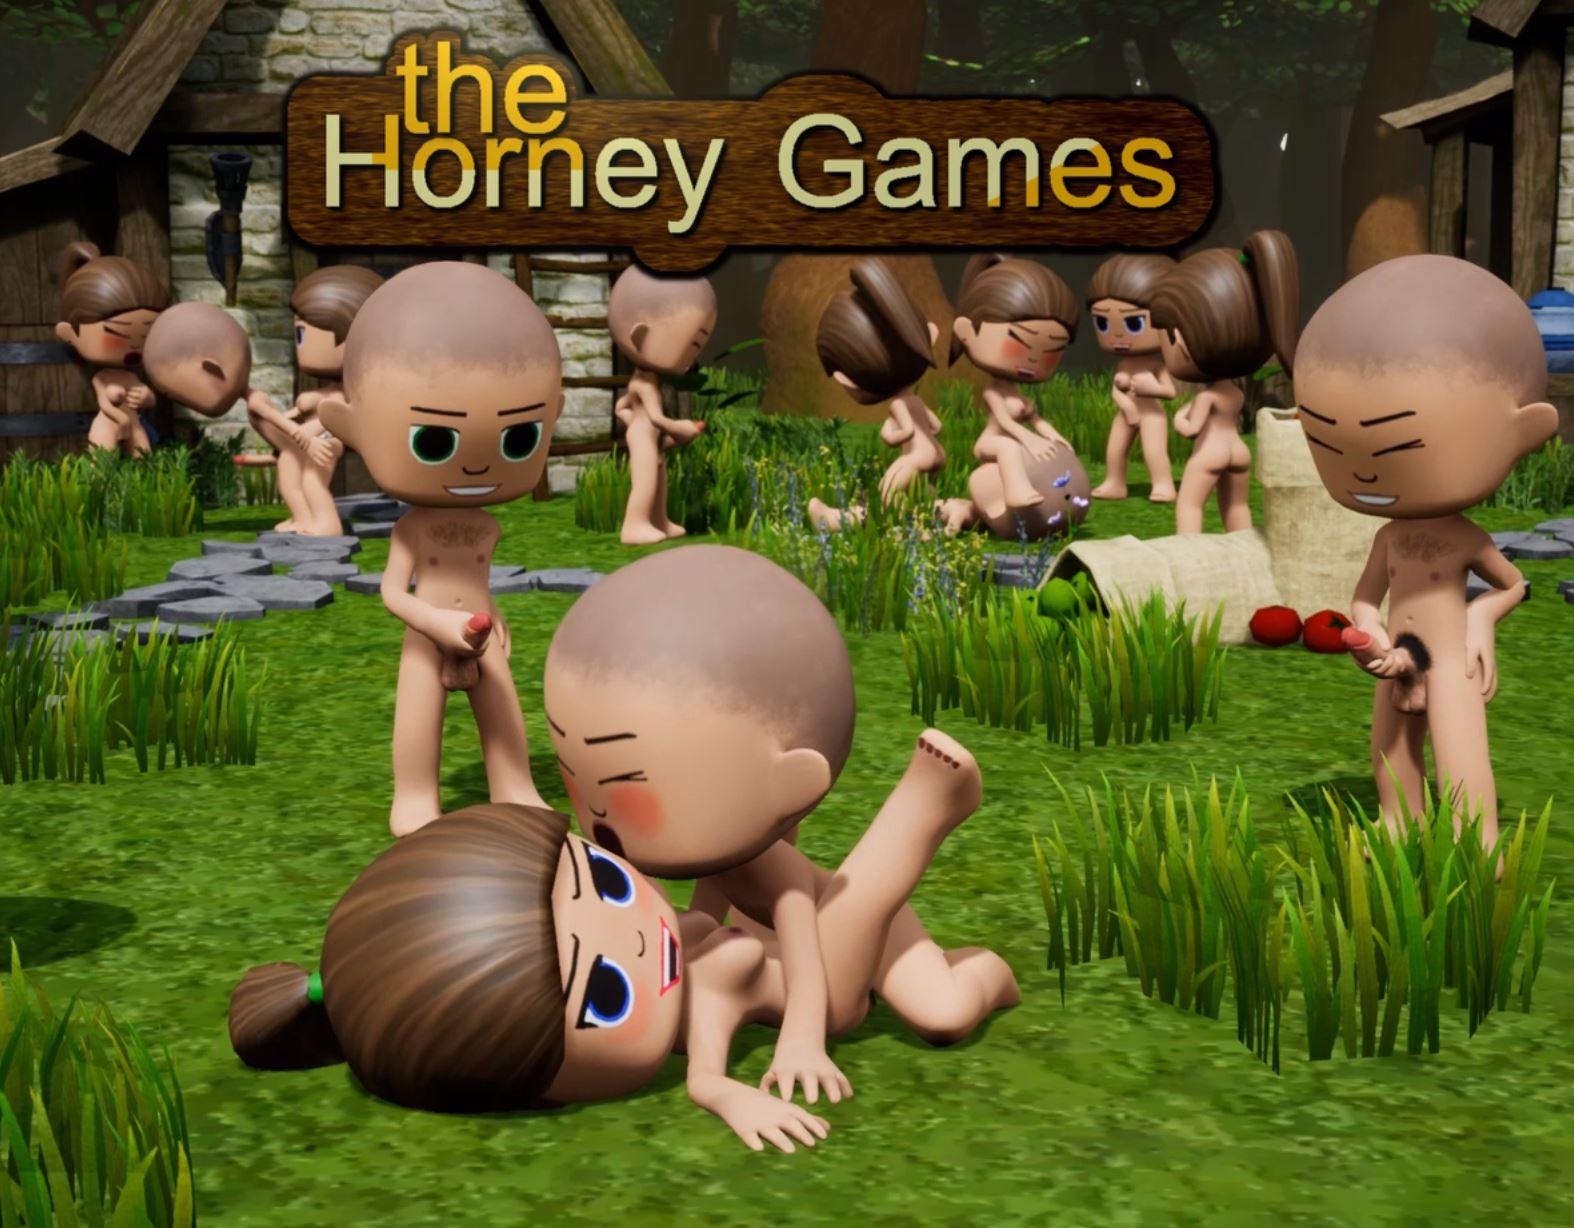 Unreal Engine] The Horny Games mini game - vFinal by AdulTlubA 18+ Adult  xxx Porn Game Download